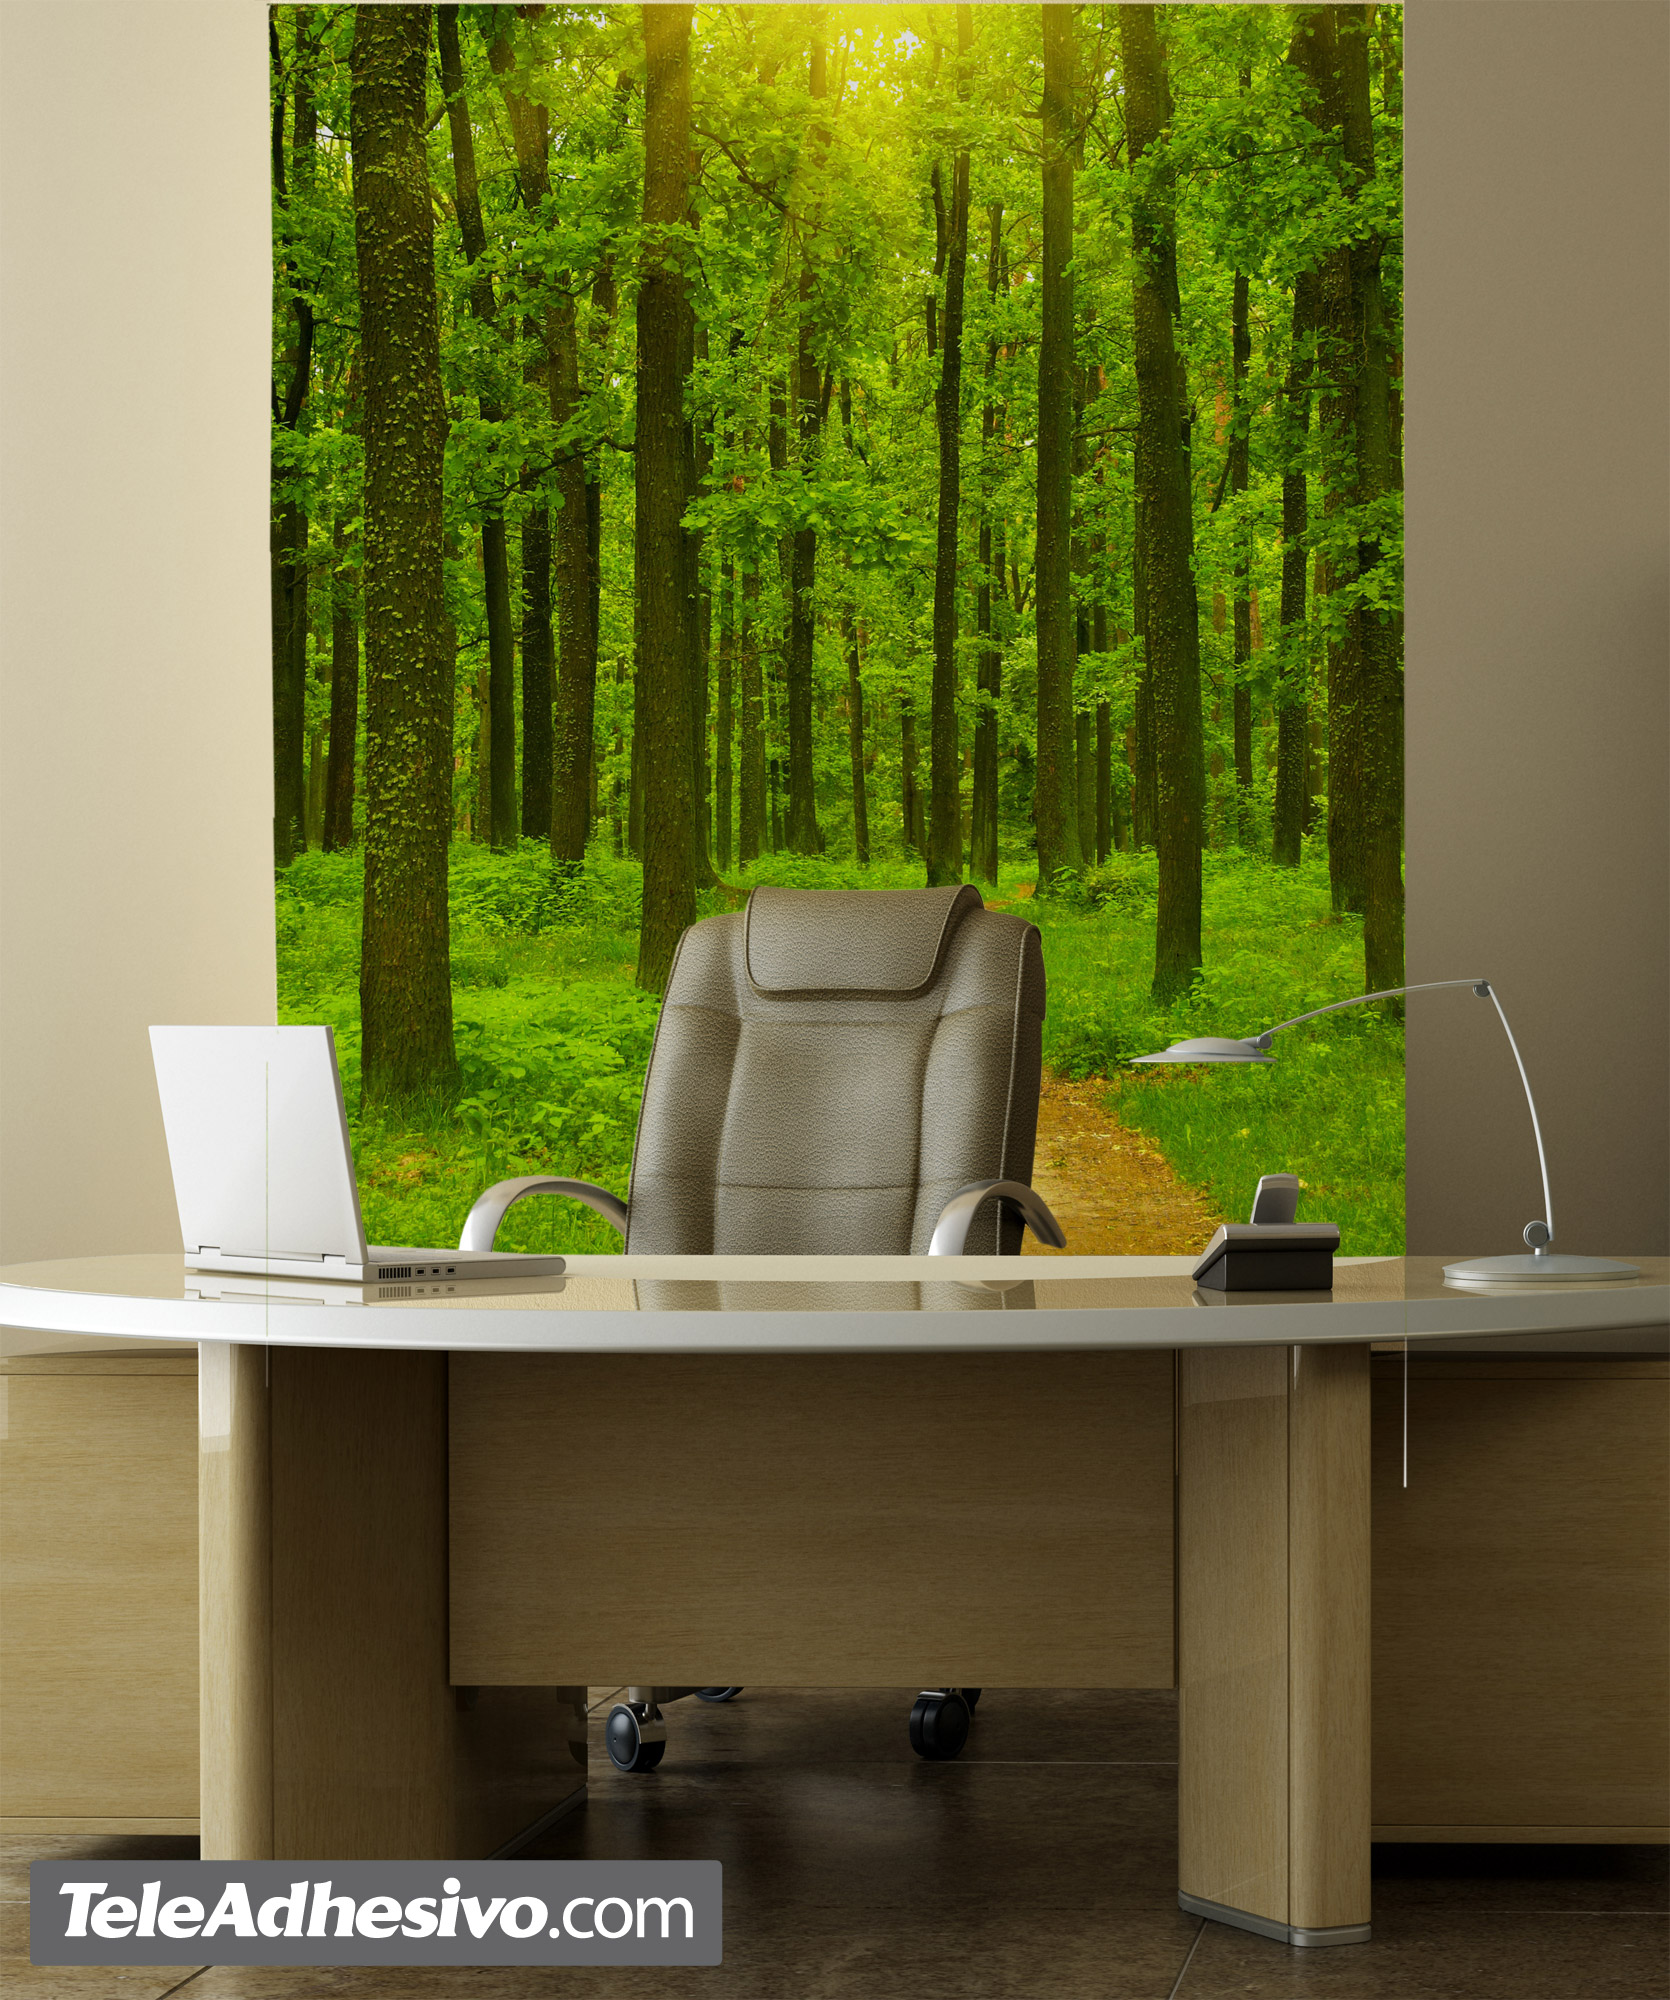 Wall Murals: Sunset in the forest